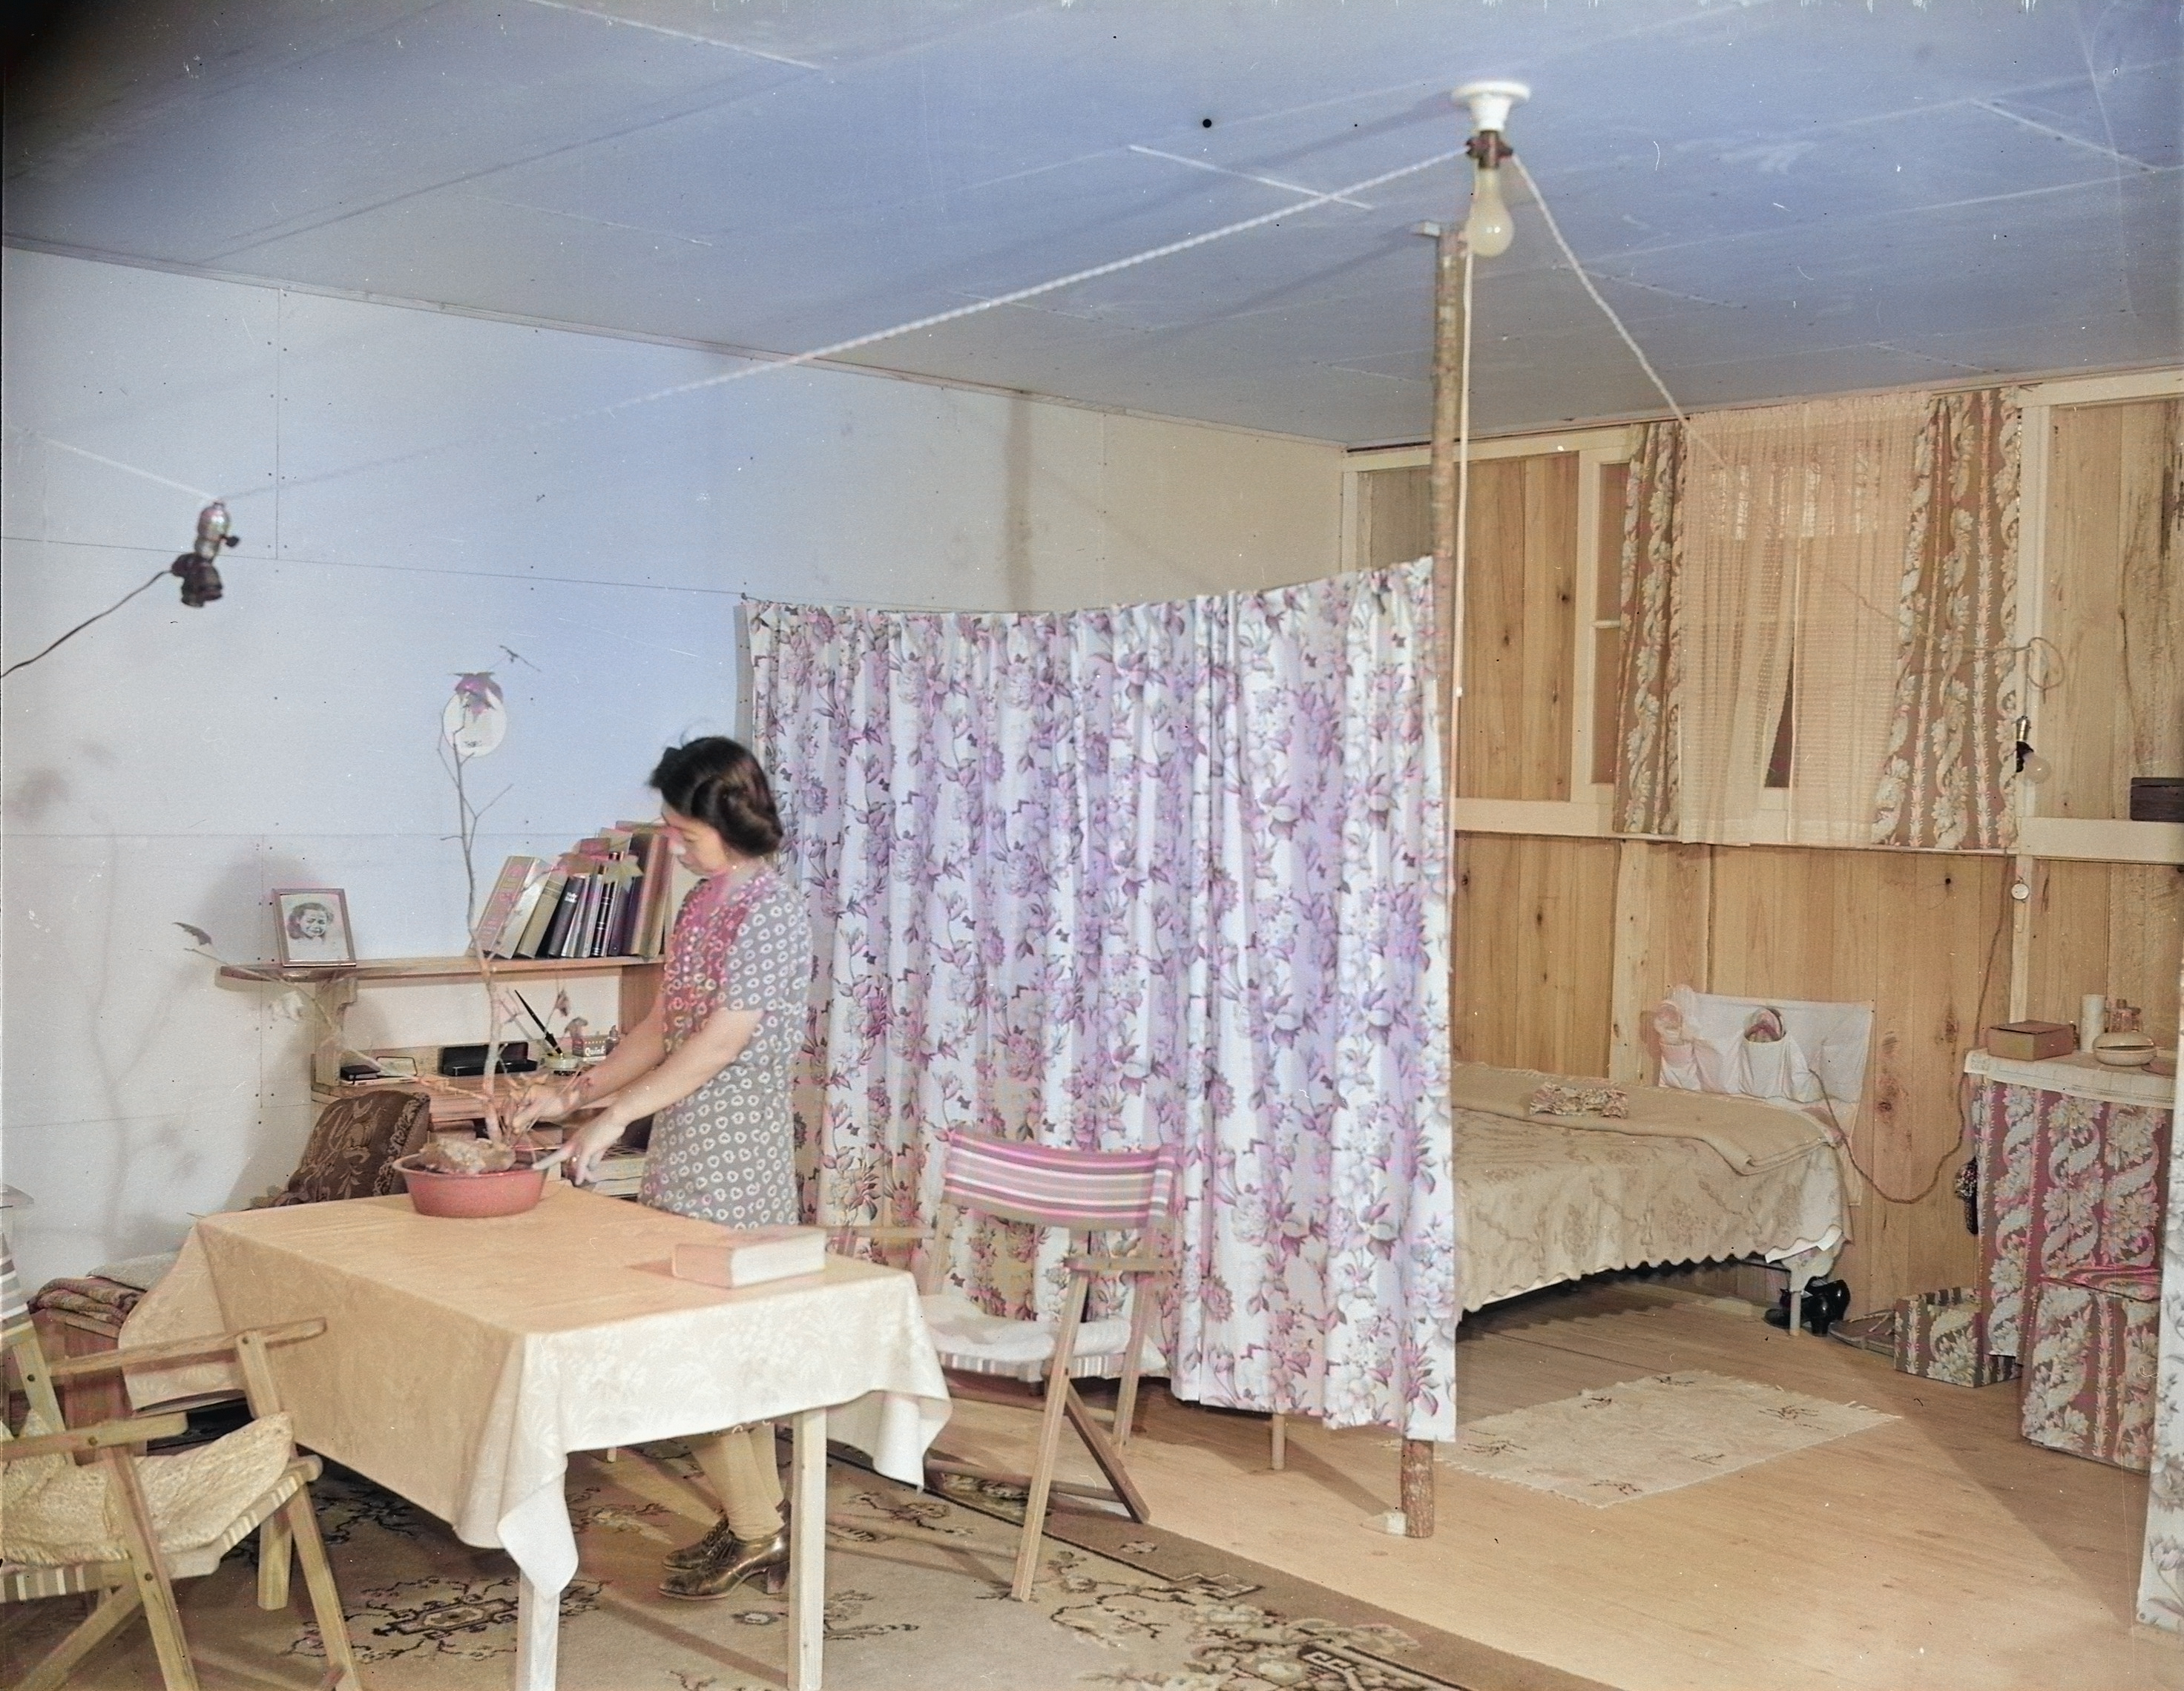 View of the interior of a typical barracks home at Jerome War Relocation Center, Arkansas, United States, 17 Nov 1942 [Colorized by WW2DB]